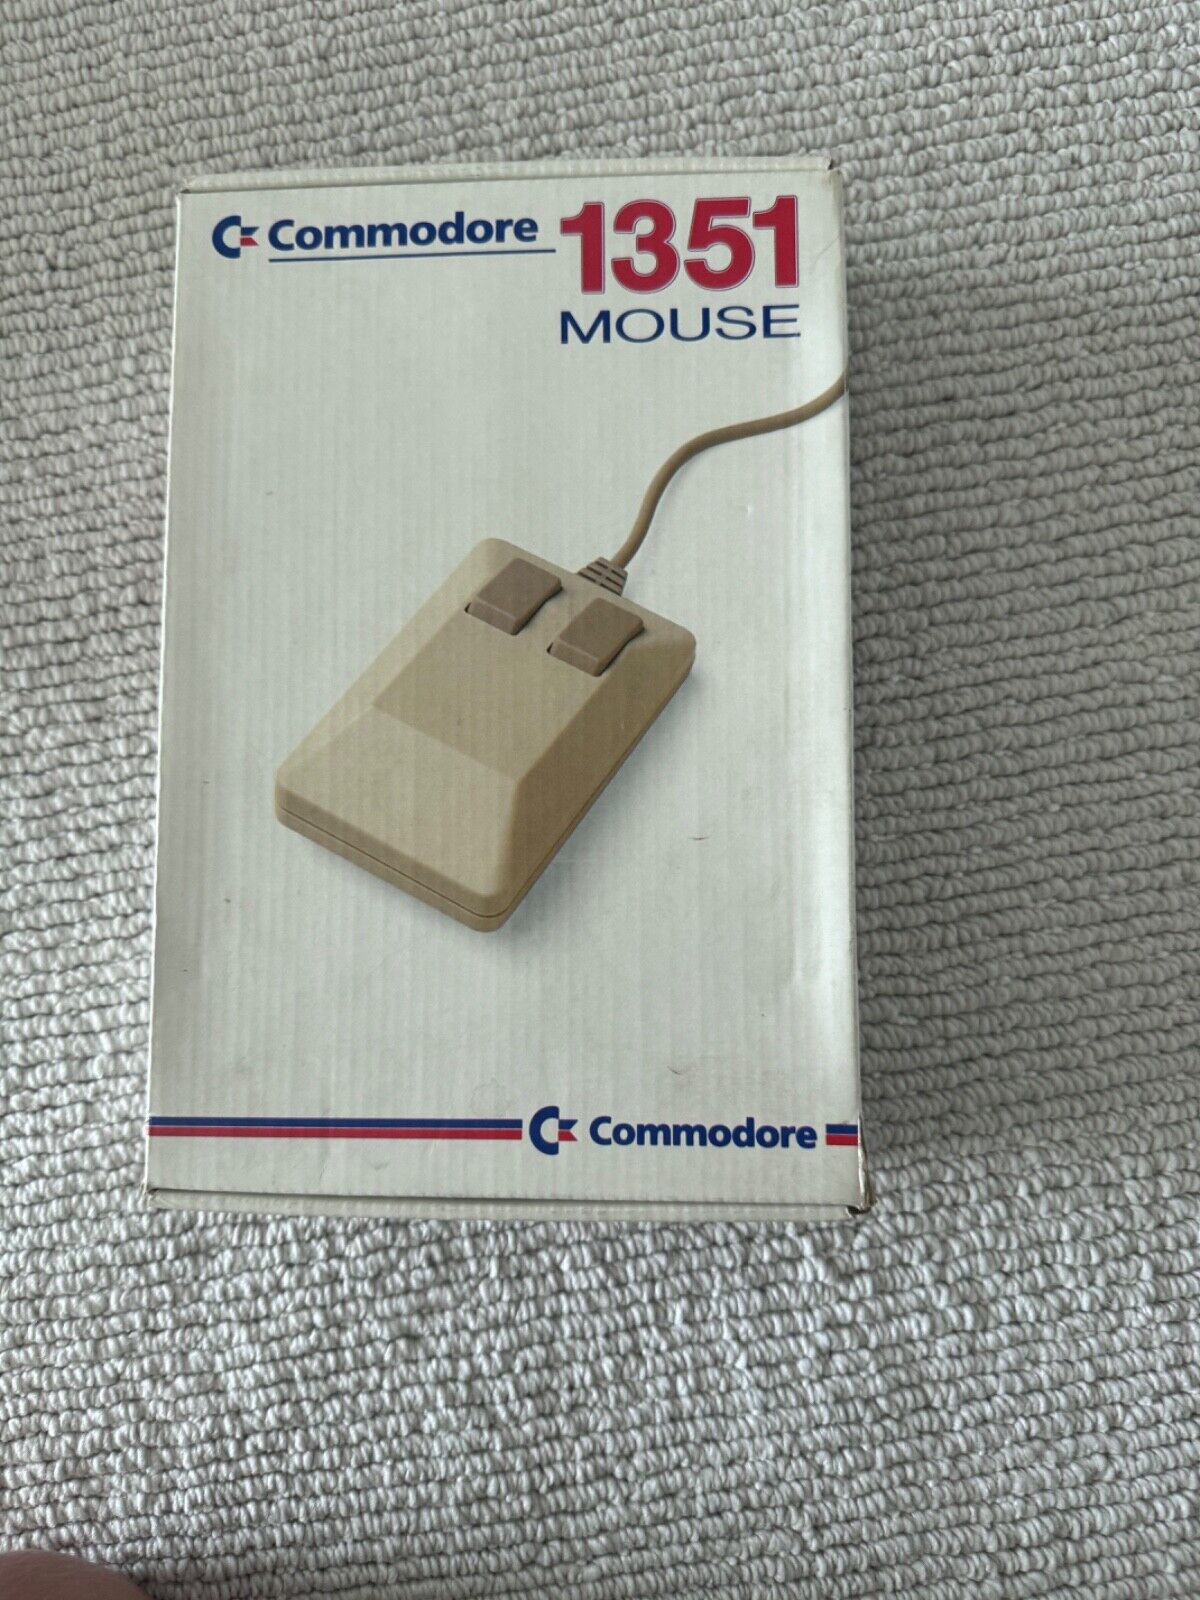 Vintage Commodore 1351 2 Button Serial Mouse With Box